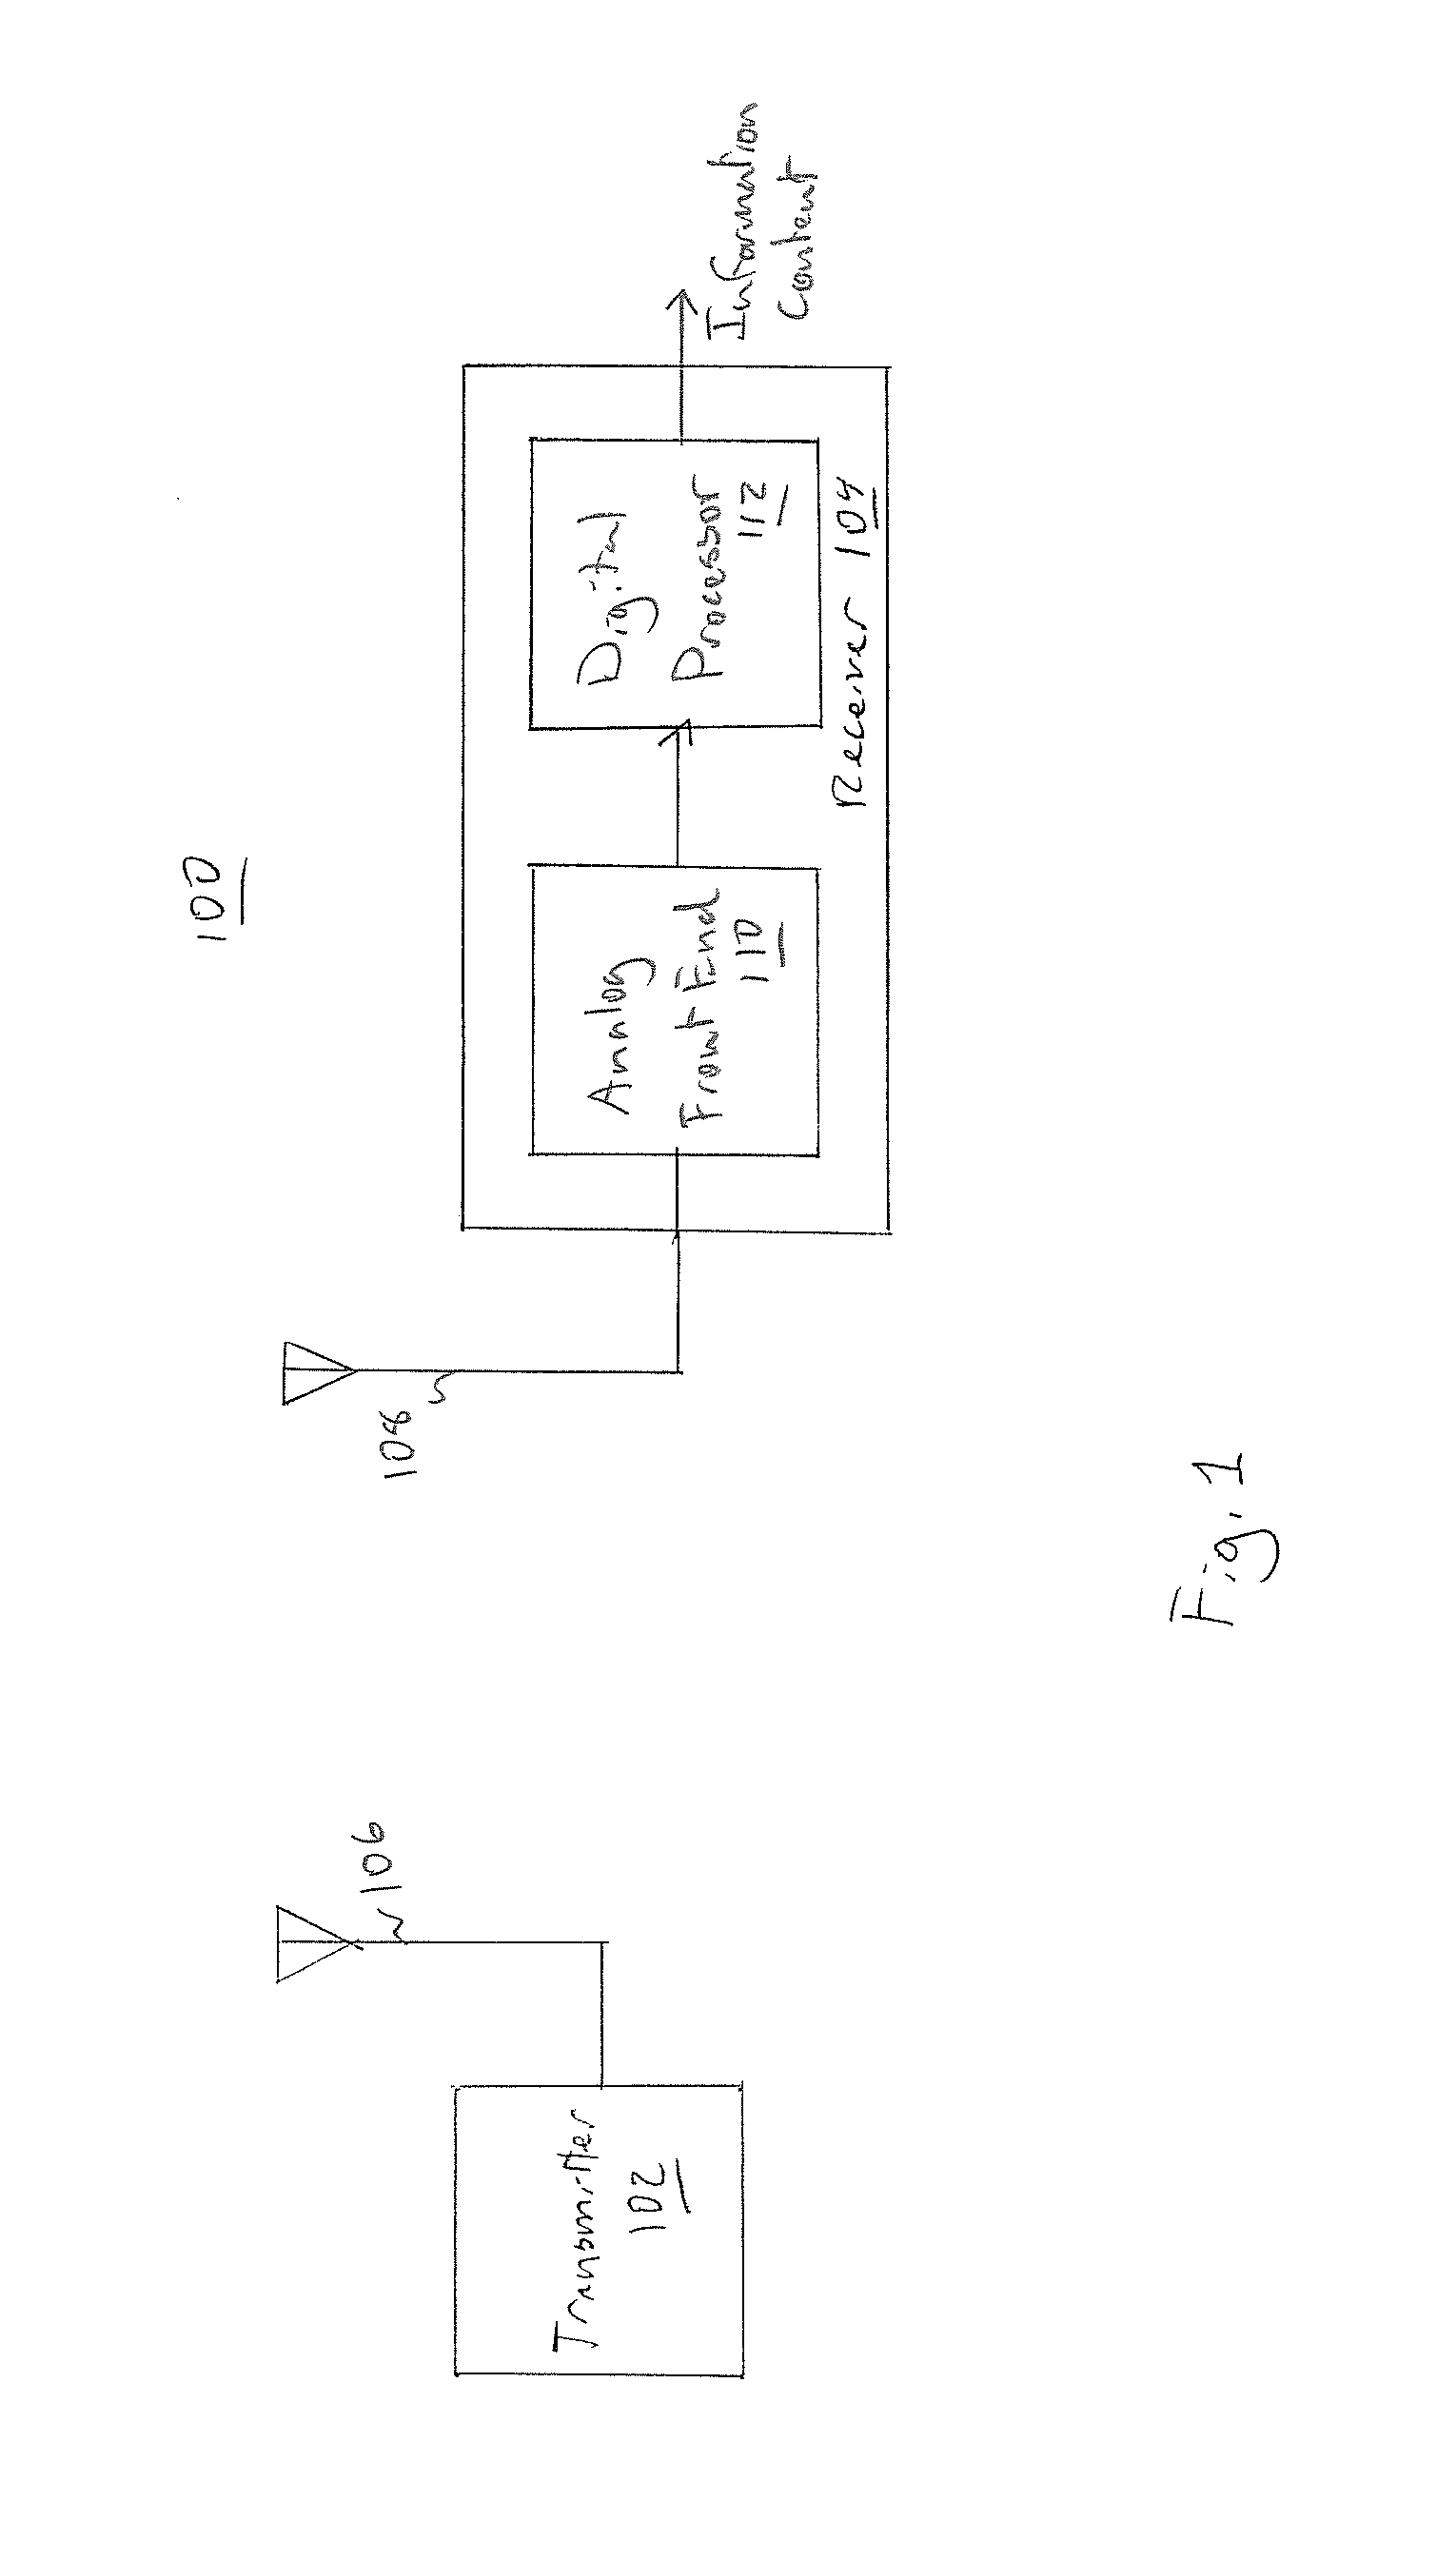 Estimation and compensation for carrier frequency offset and sampling clock offset in a communication system